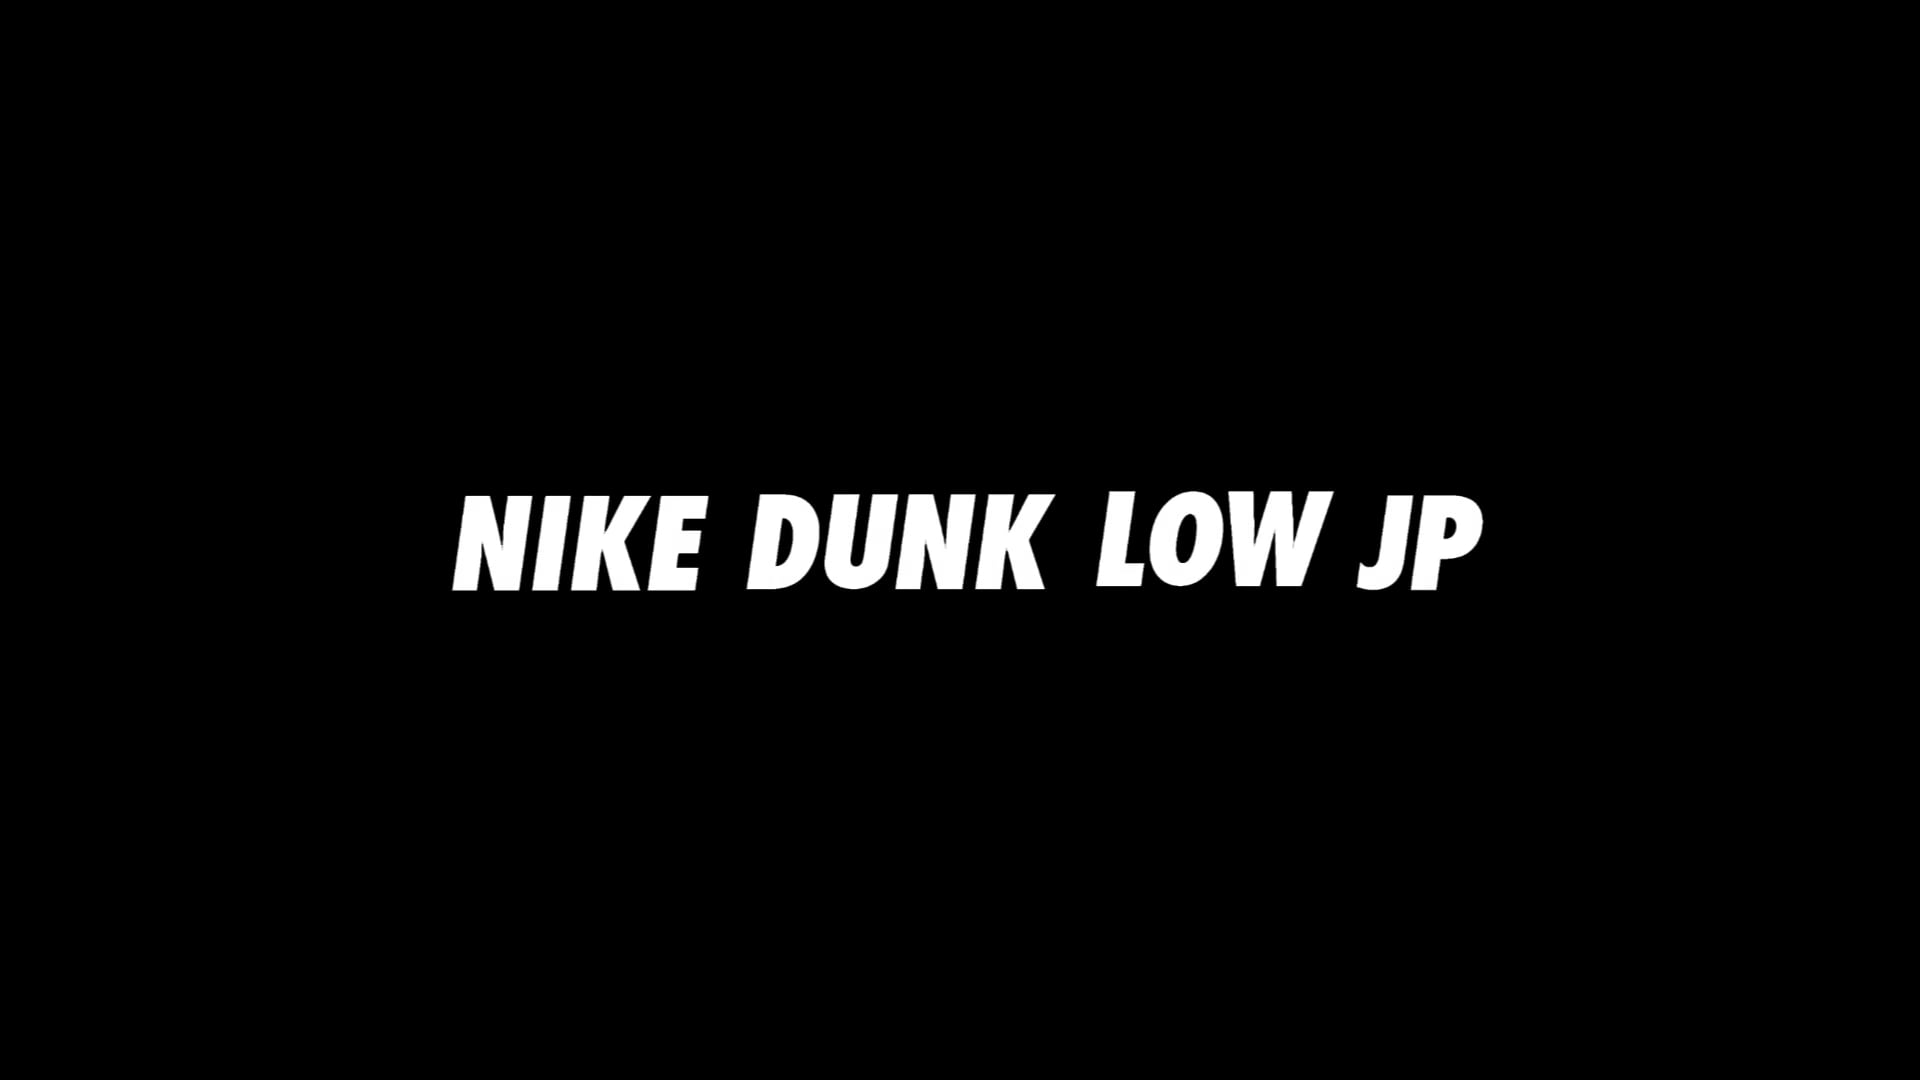 NIKE DUNK LOW CO.JP “mismatched” atmos